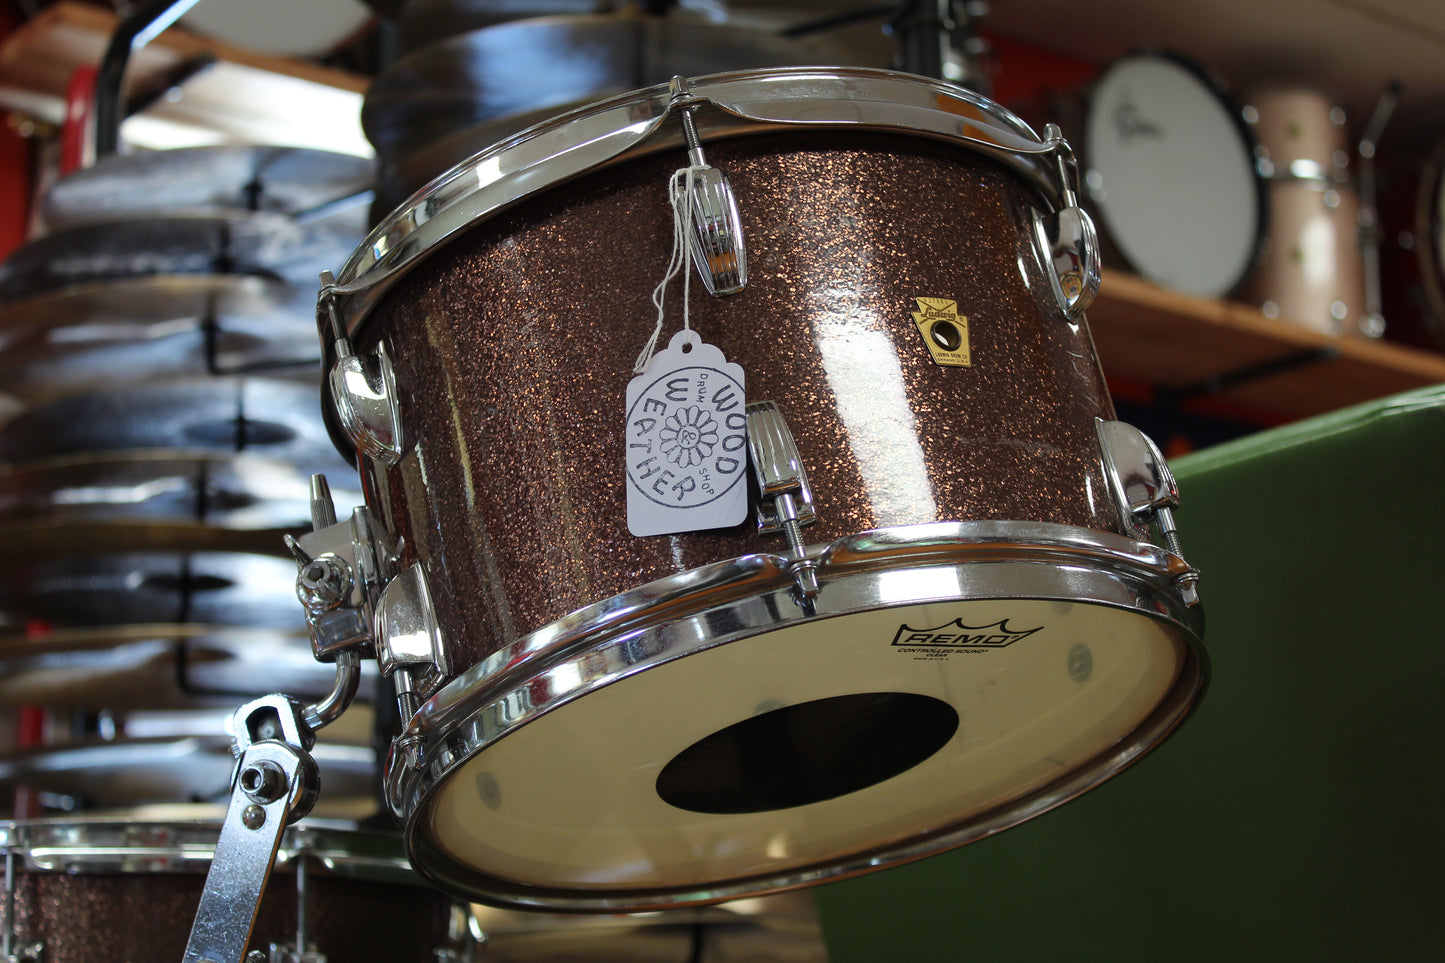 1966 Ludwig Downbeat outfit in Burgundy Sparkle 14x20 14x14 8x12